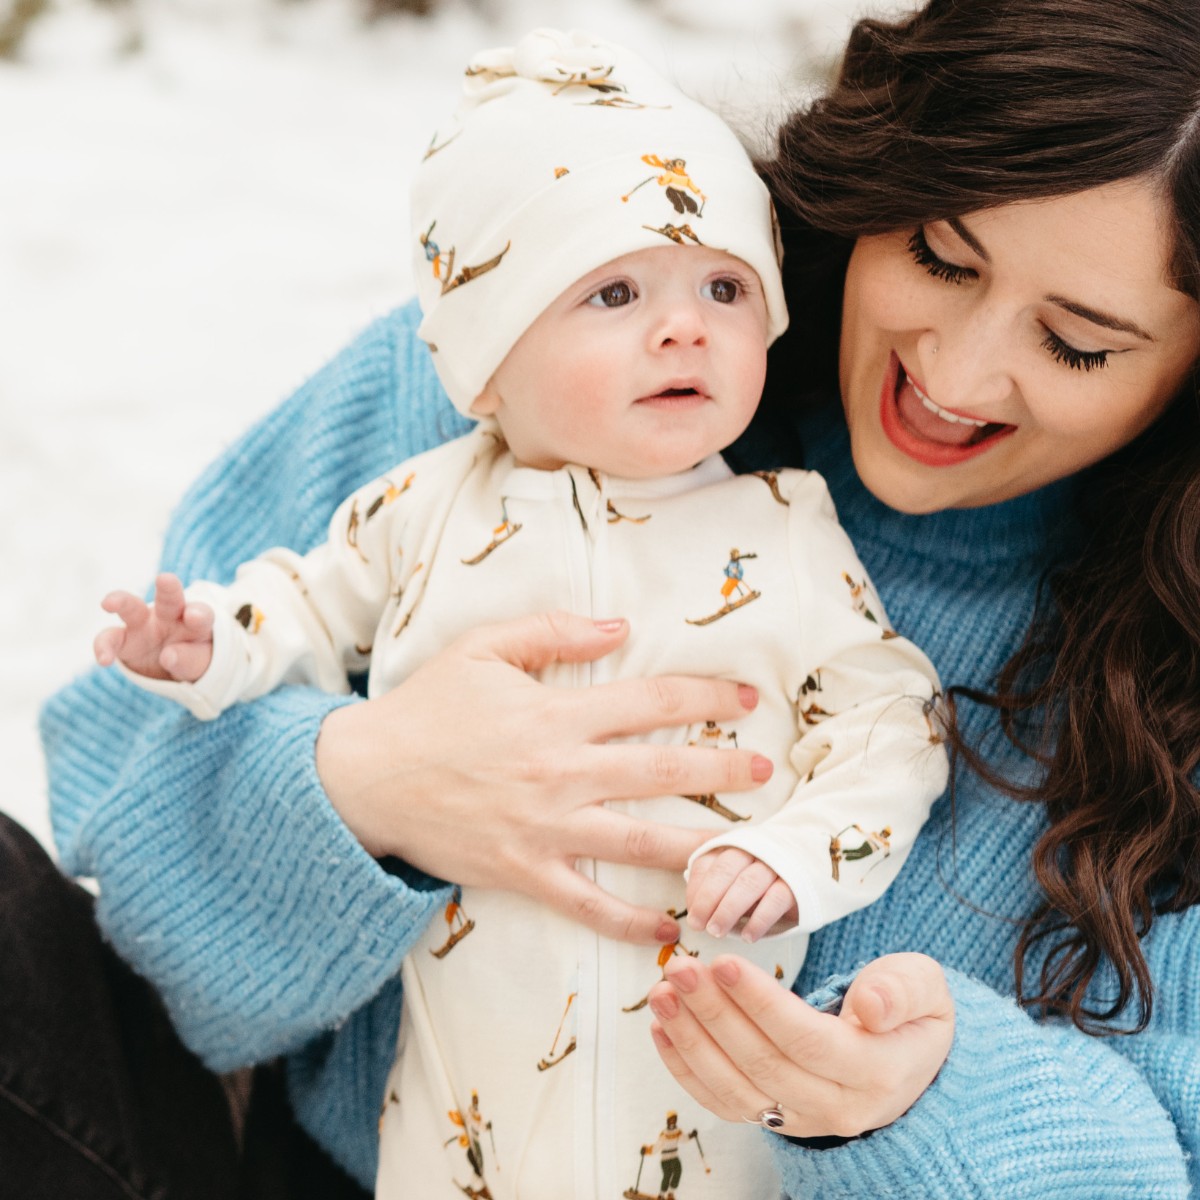 In the snow, Mom wearing a blue sweater and Baby wearing the organic cotton Vintage Natural Ski Knotted Beanie Hat and matching Zipper Footed Romper by Milkbarn Kids